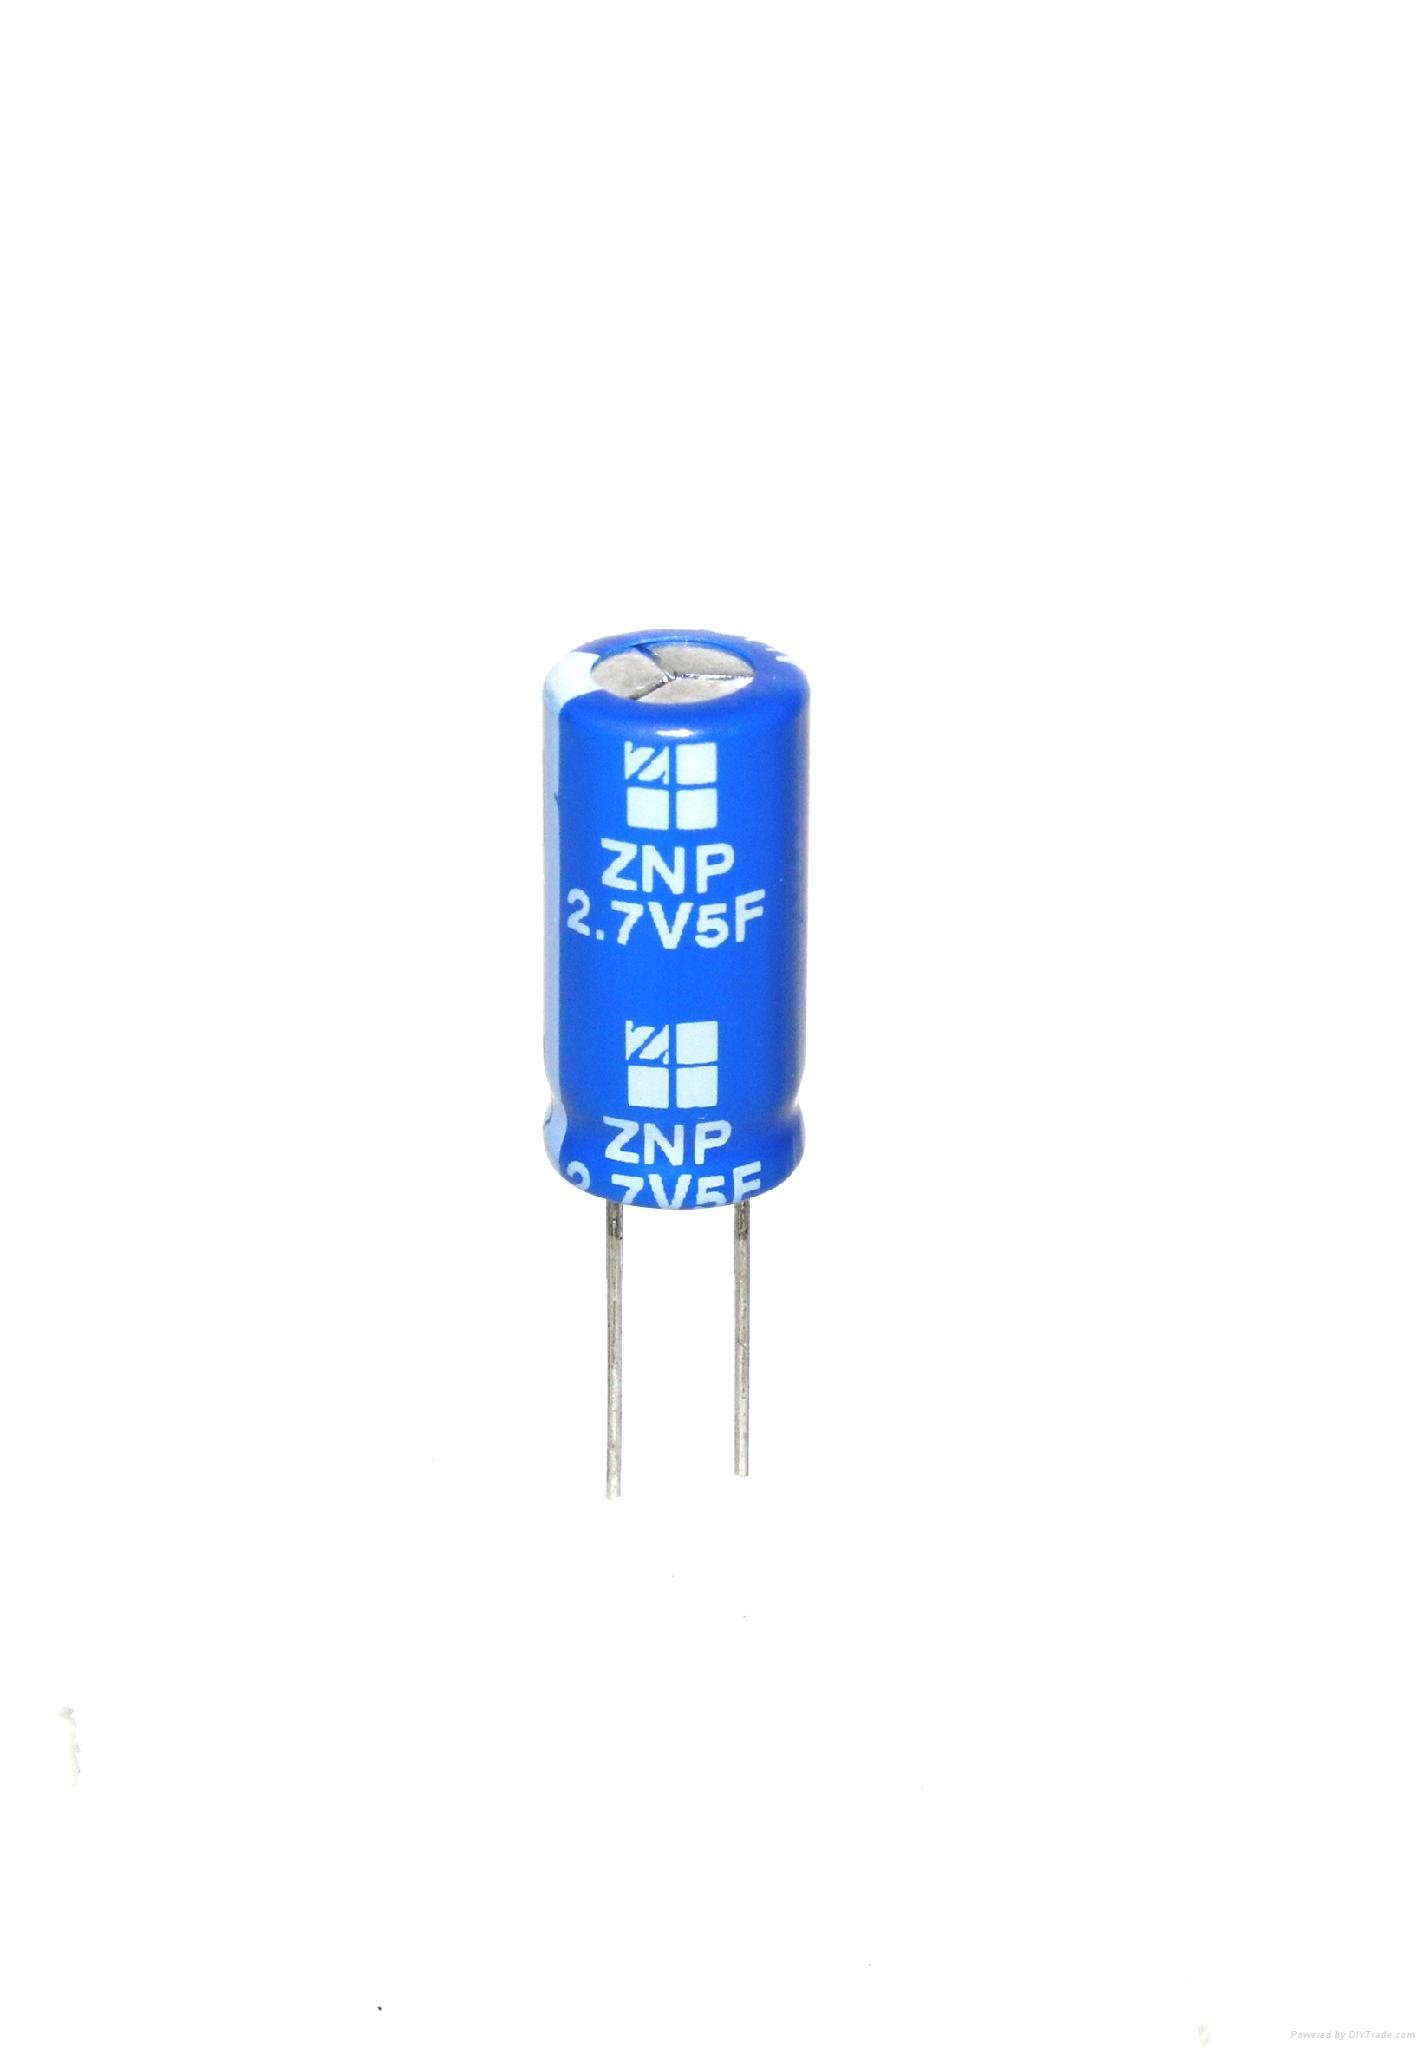 2.7V 5F EDLC Manufacturer Electric Double Layer Capacitor 3